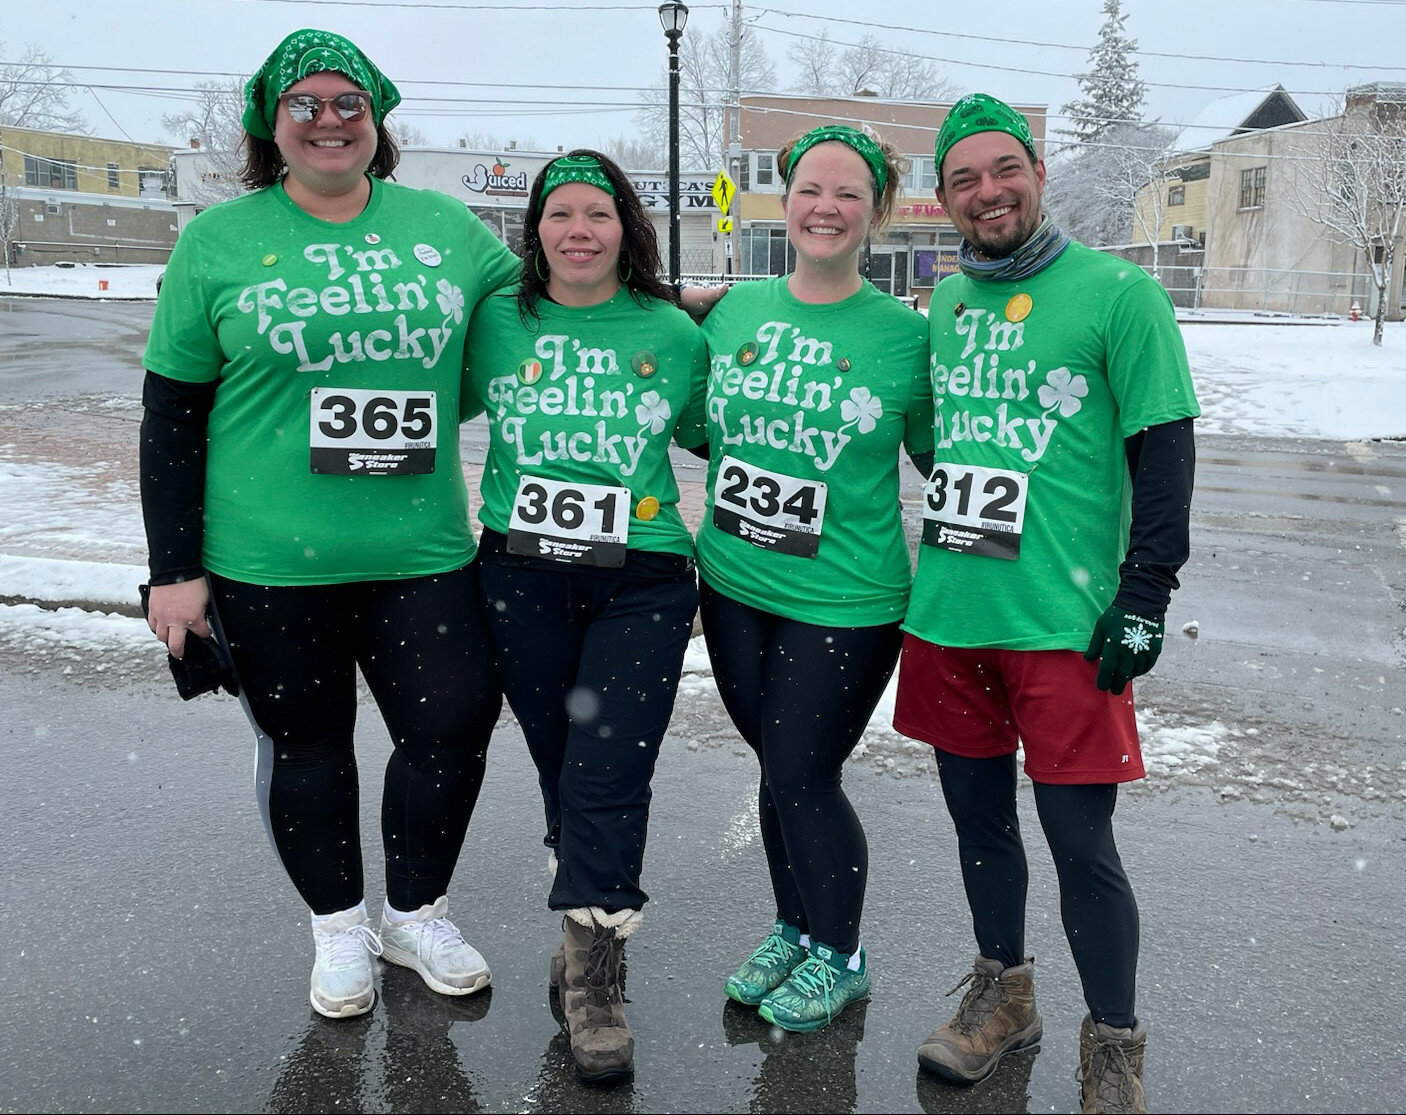 These happy adjunct professors from Mohawk Valley Community College showed up I their running gear and green to run/walk Utica's St. Patrick's Day Parade on Saturday. From left Mindy Reeder, Sharon Powell, Megan Boulerice and Tony LePage.